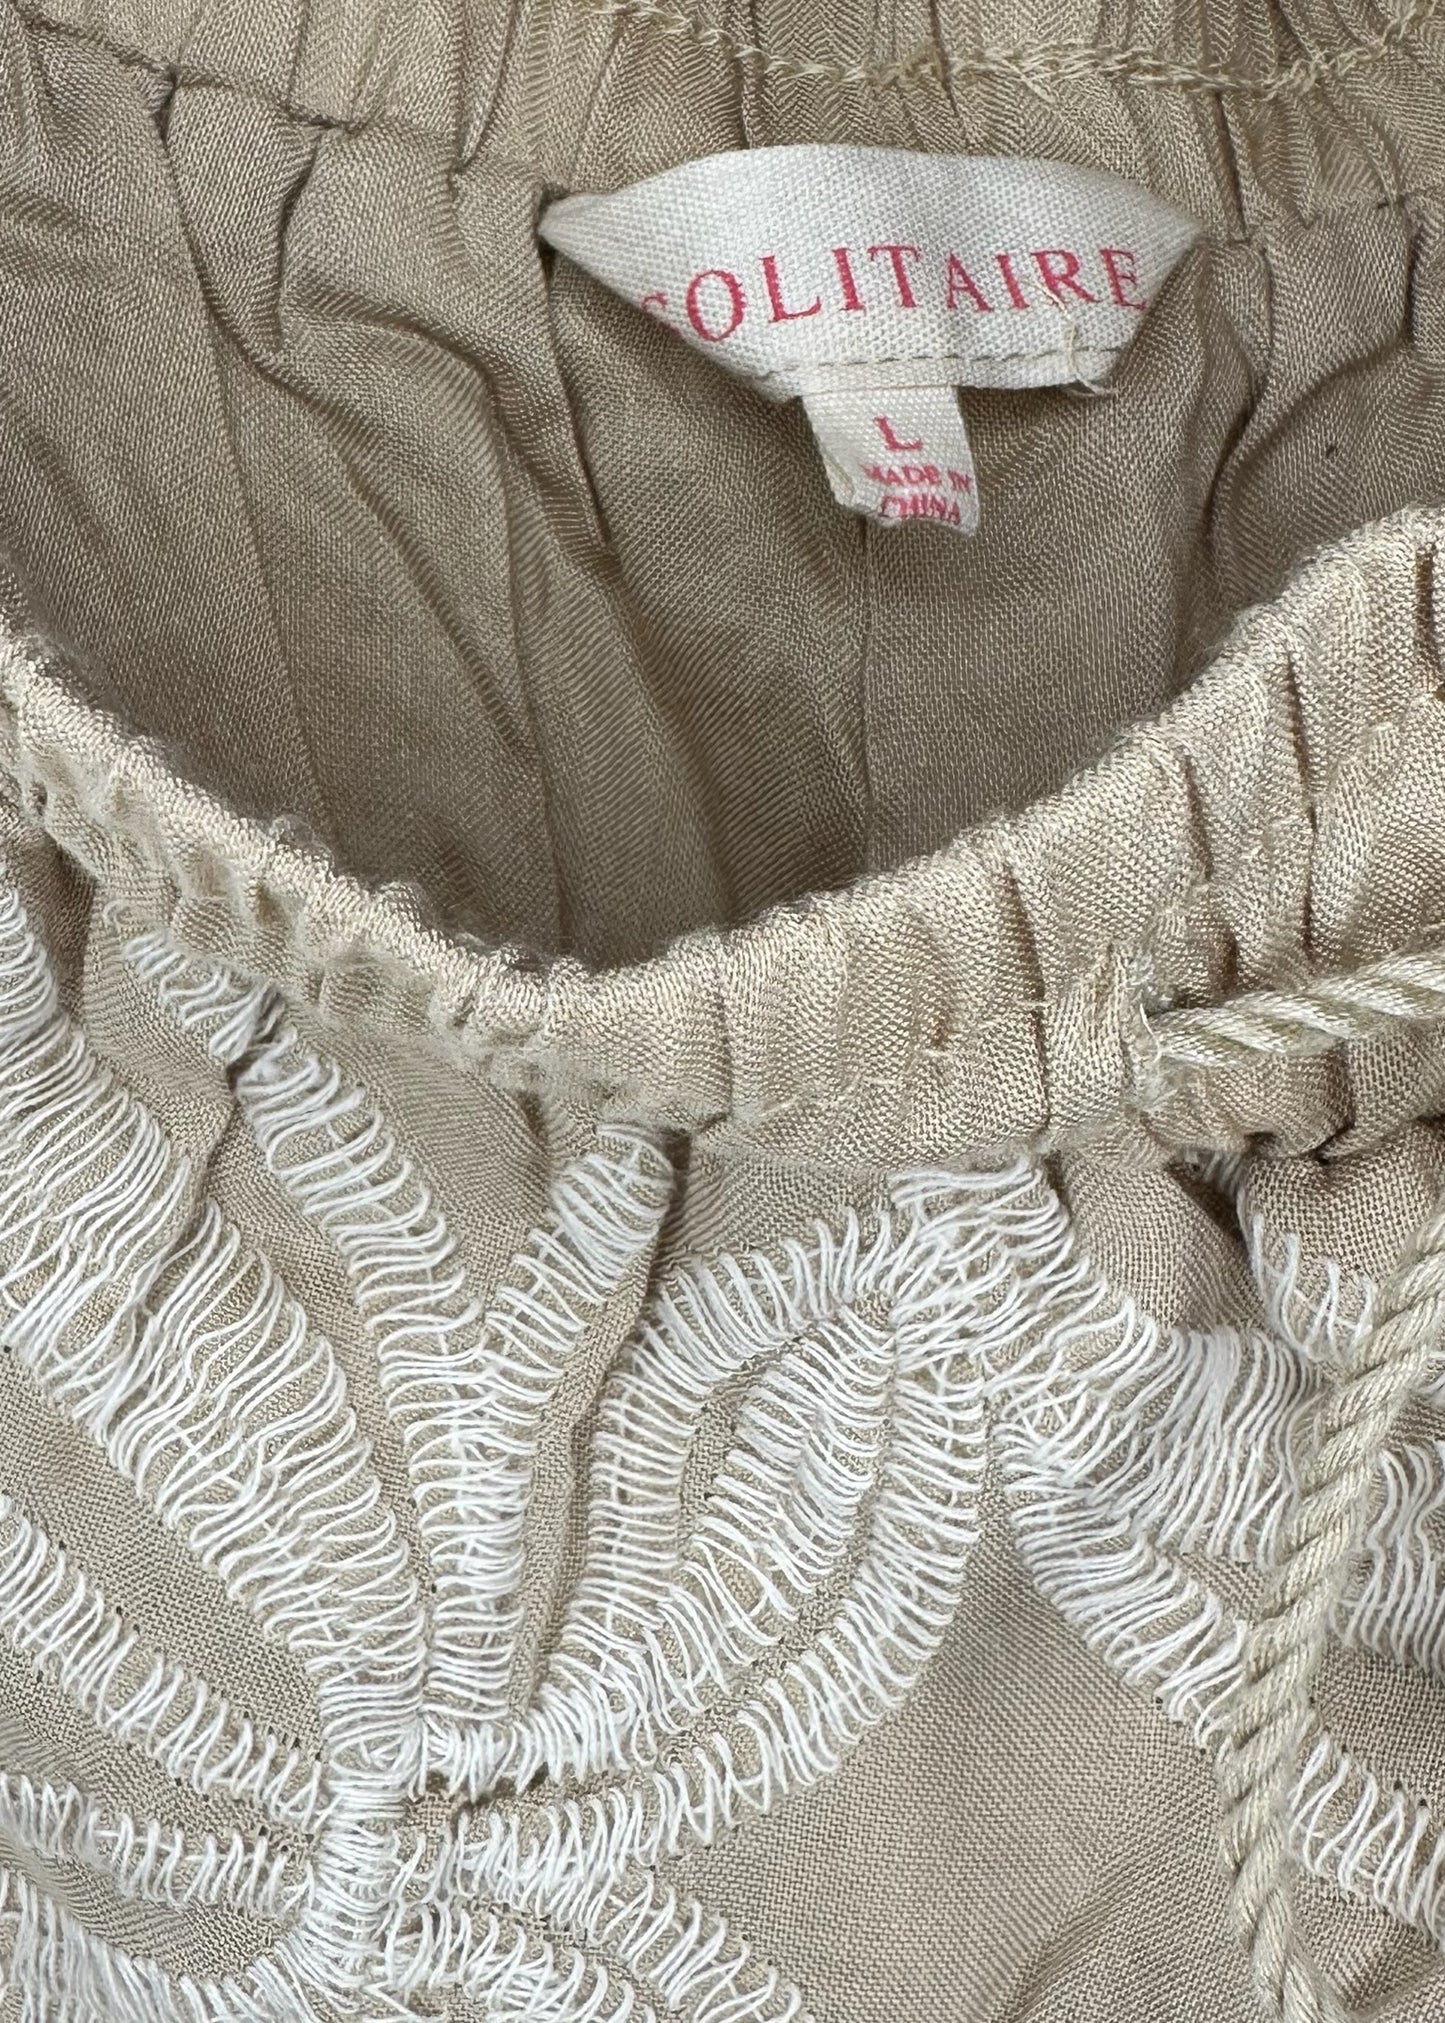 Tan Lace Shorts by Solitaire